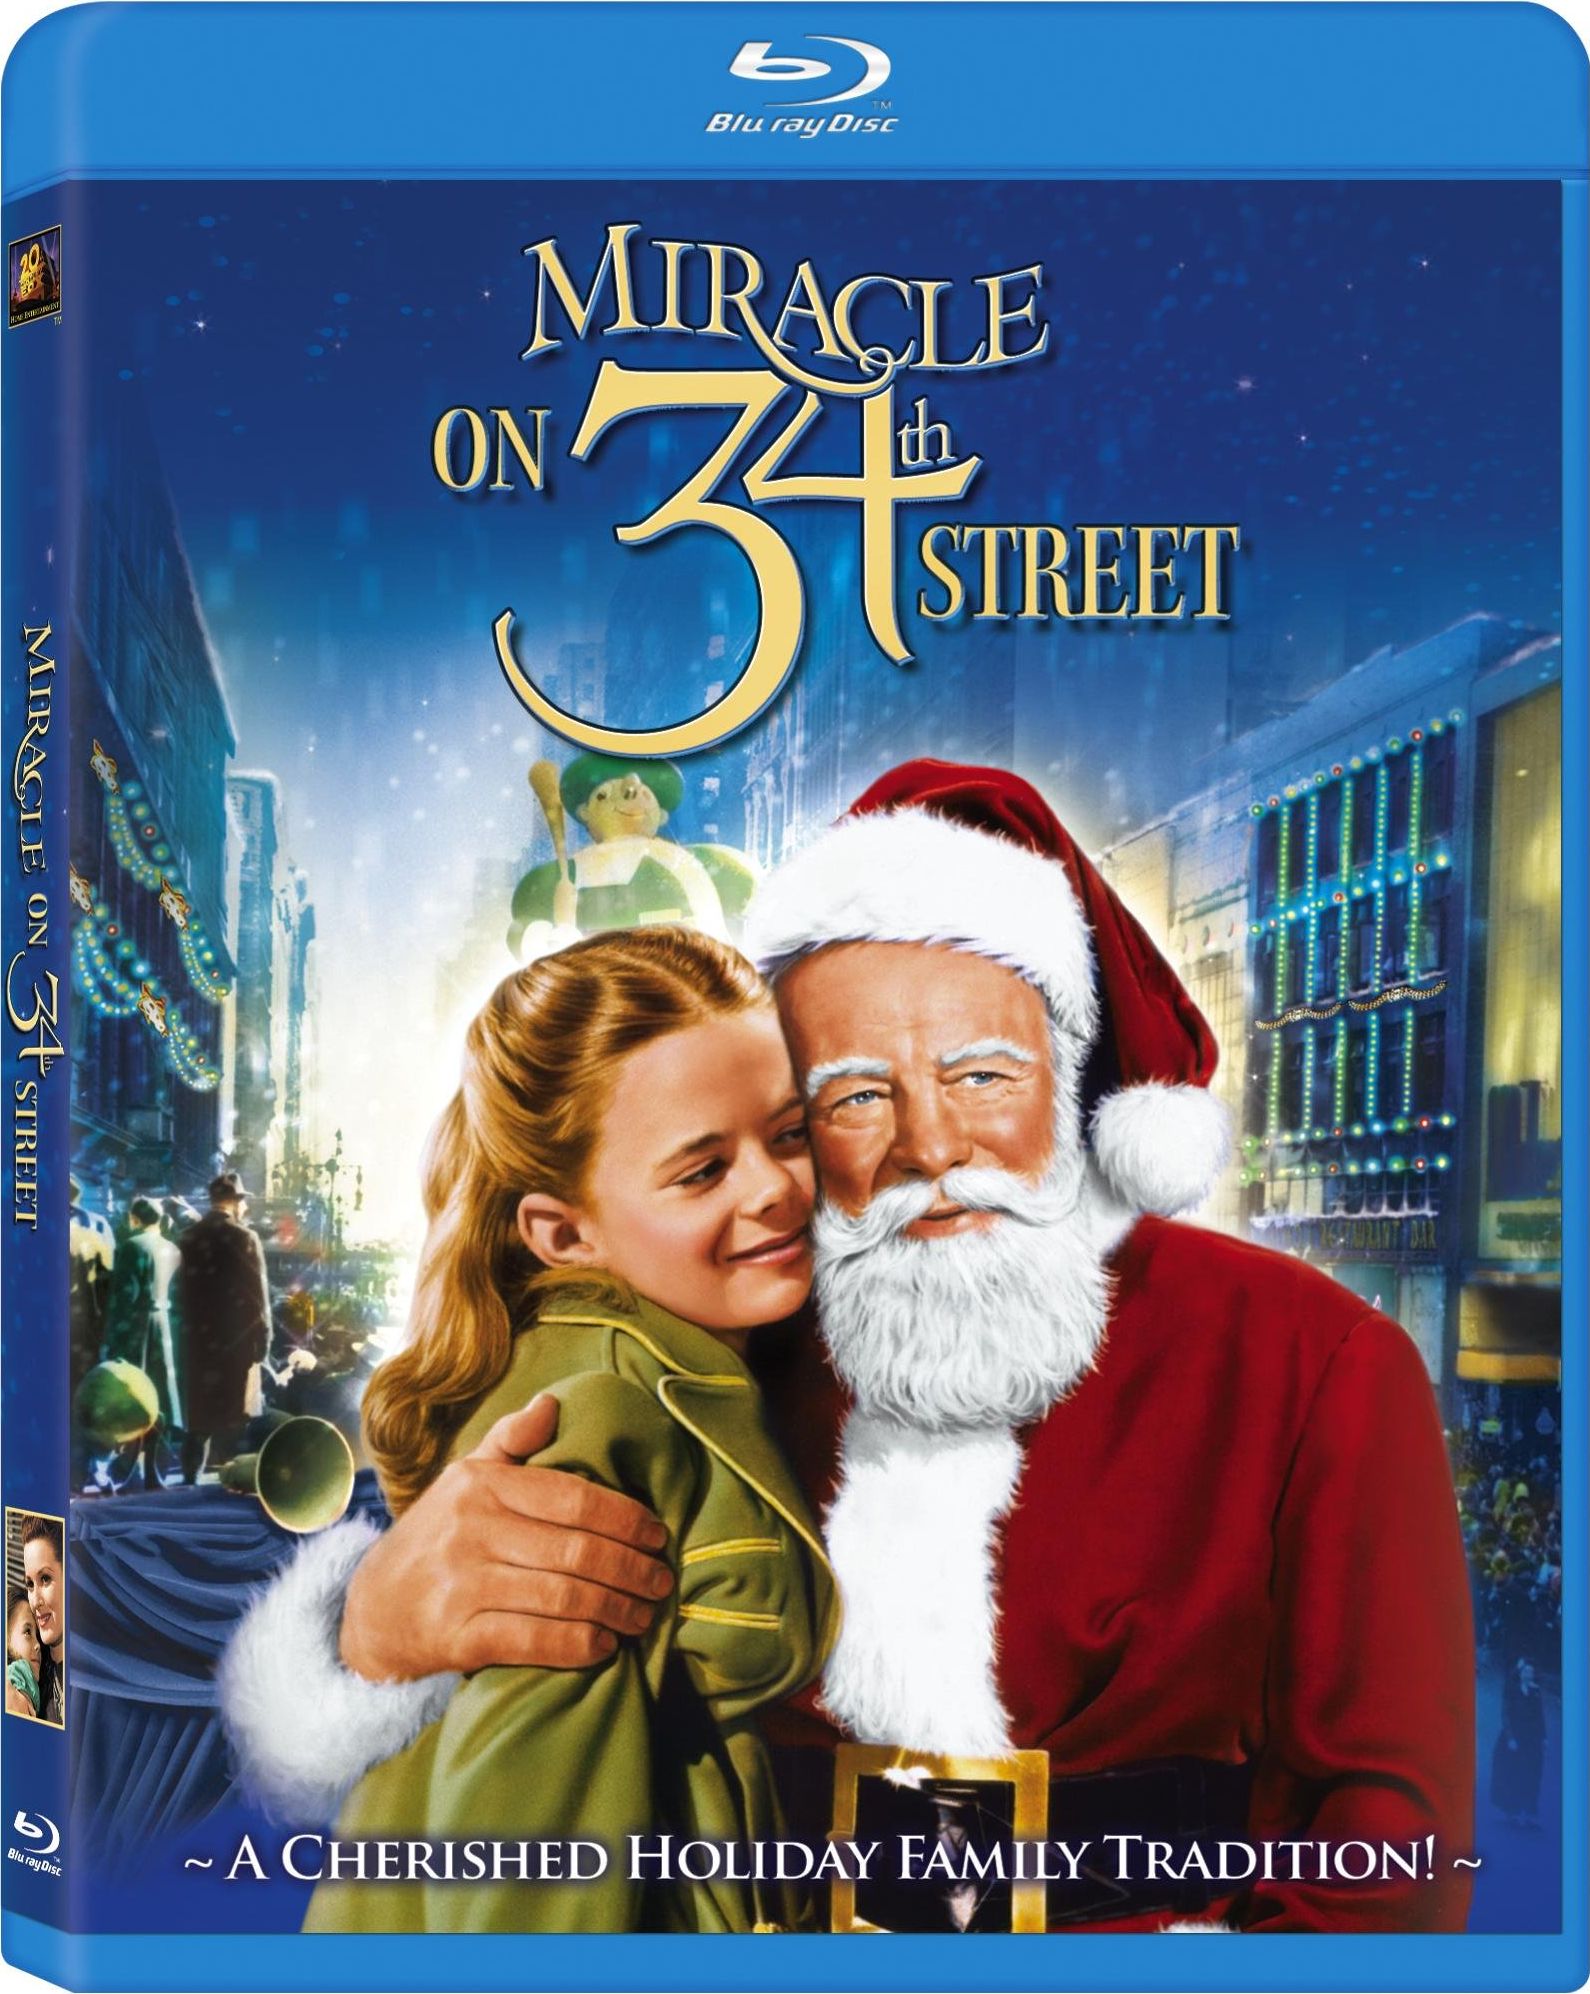 Miracle on 34th Street Blu-Ray Only $5.99 at Target